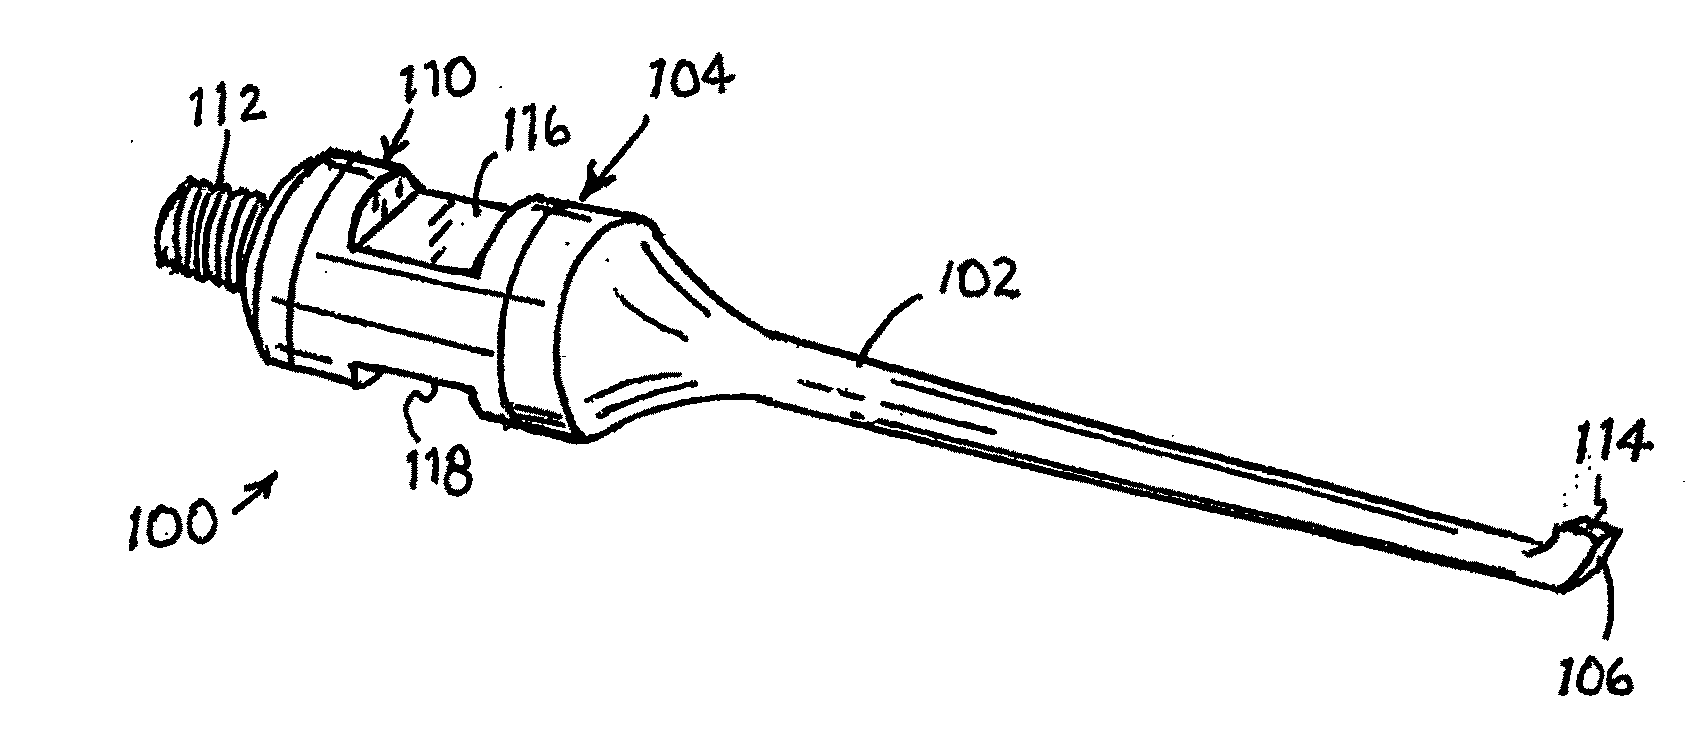 Ultrasonic medical probe with failsafe for sterility and associated method